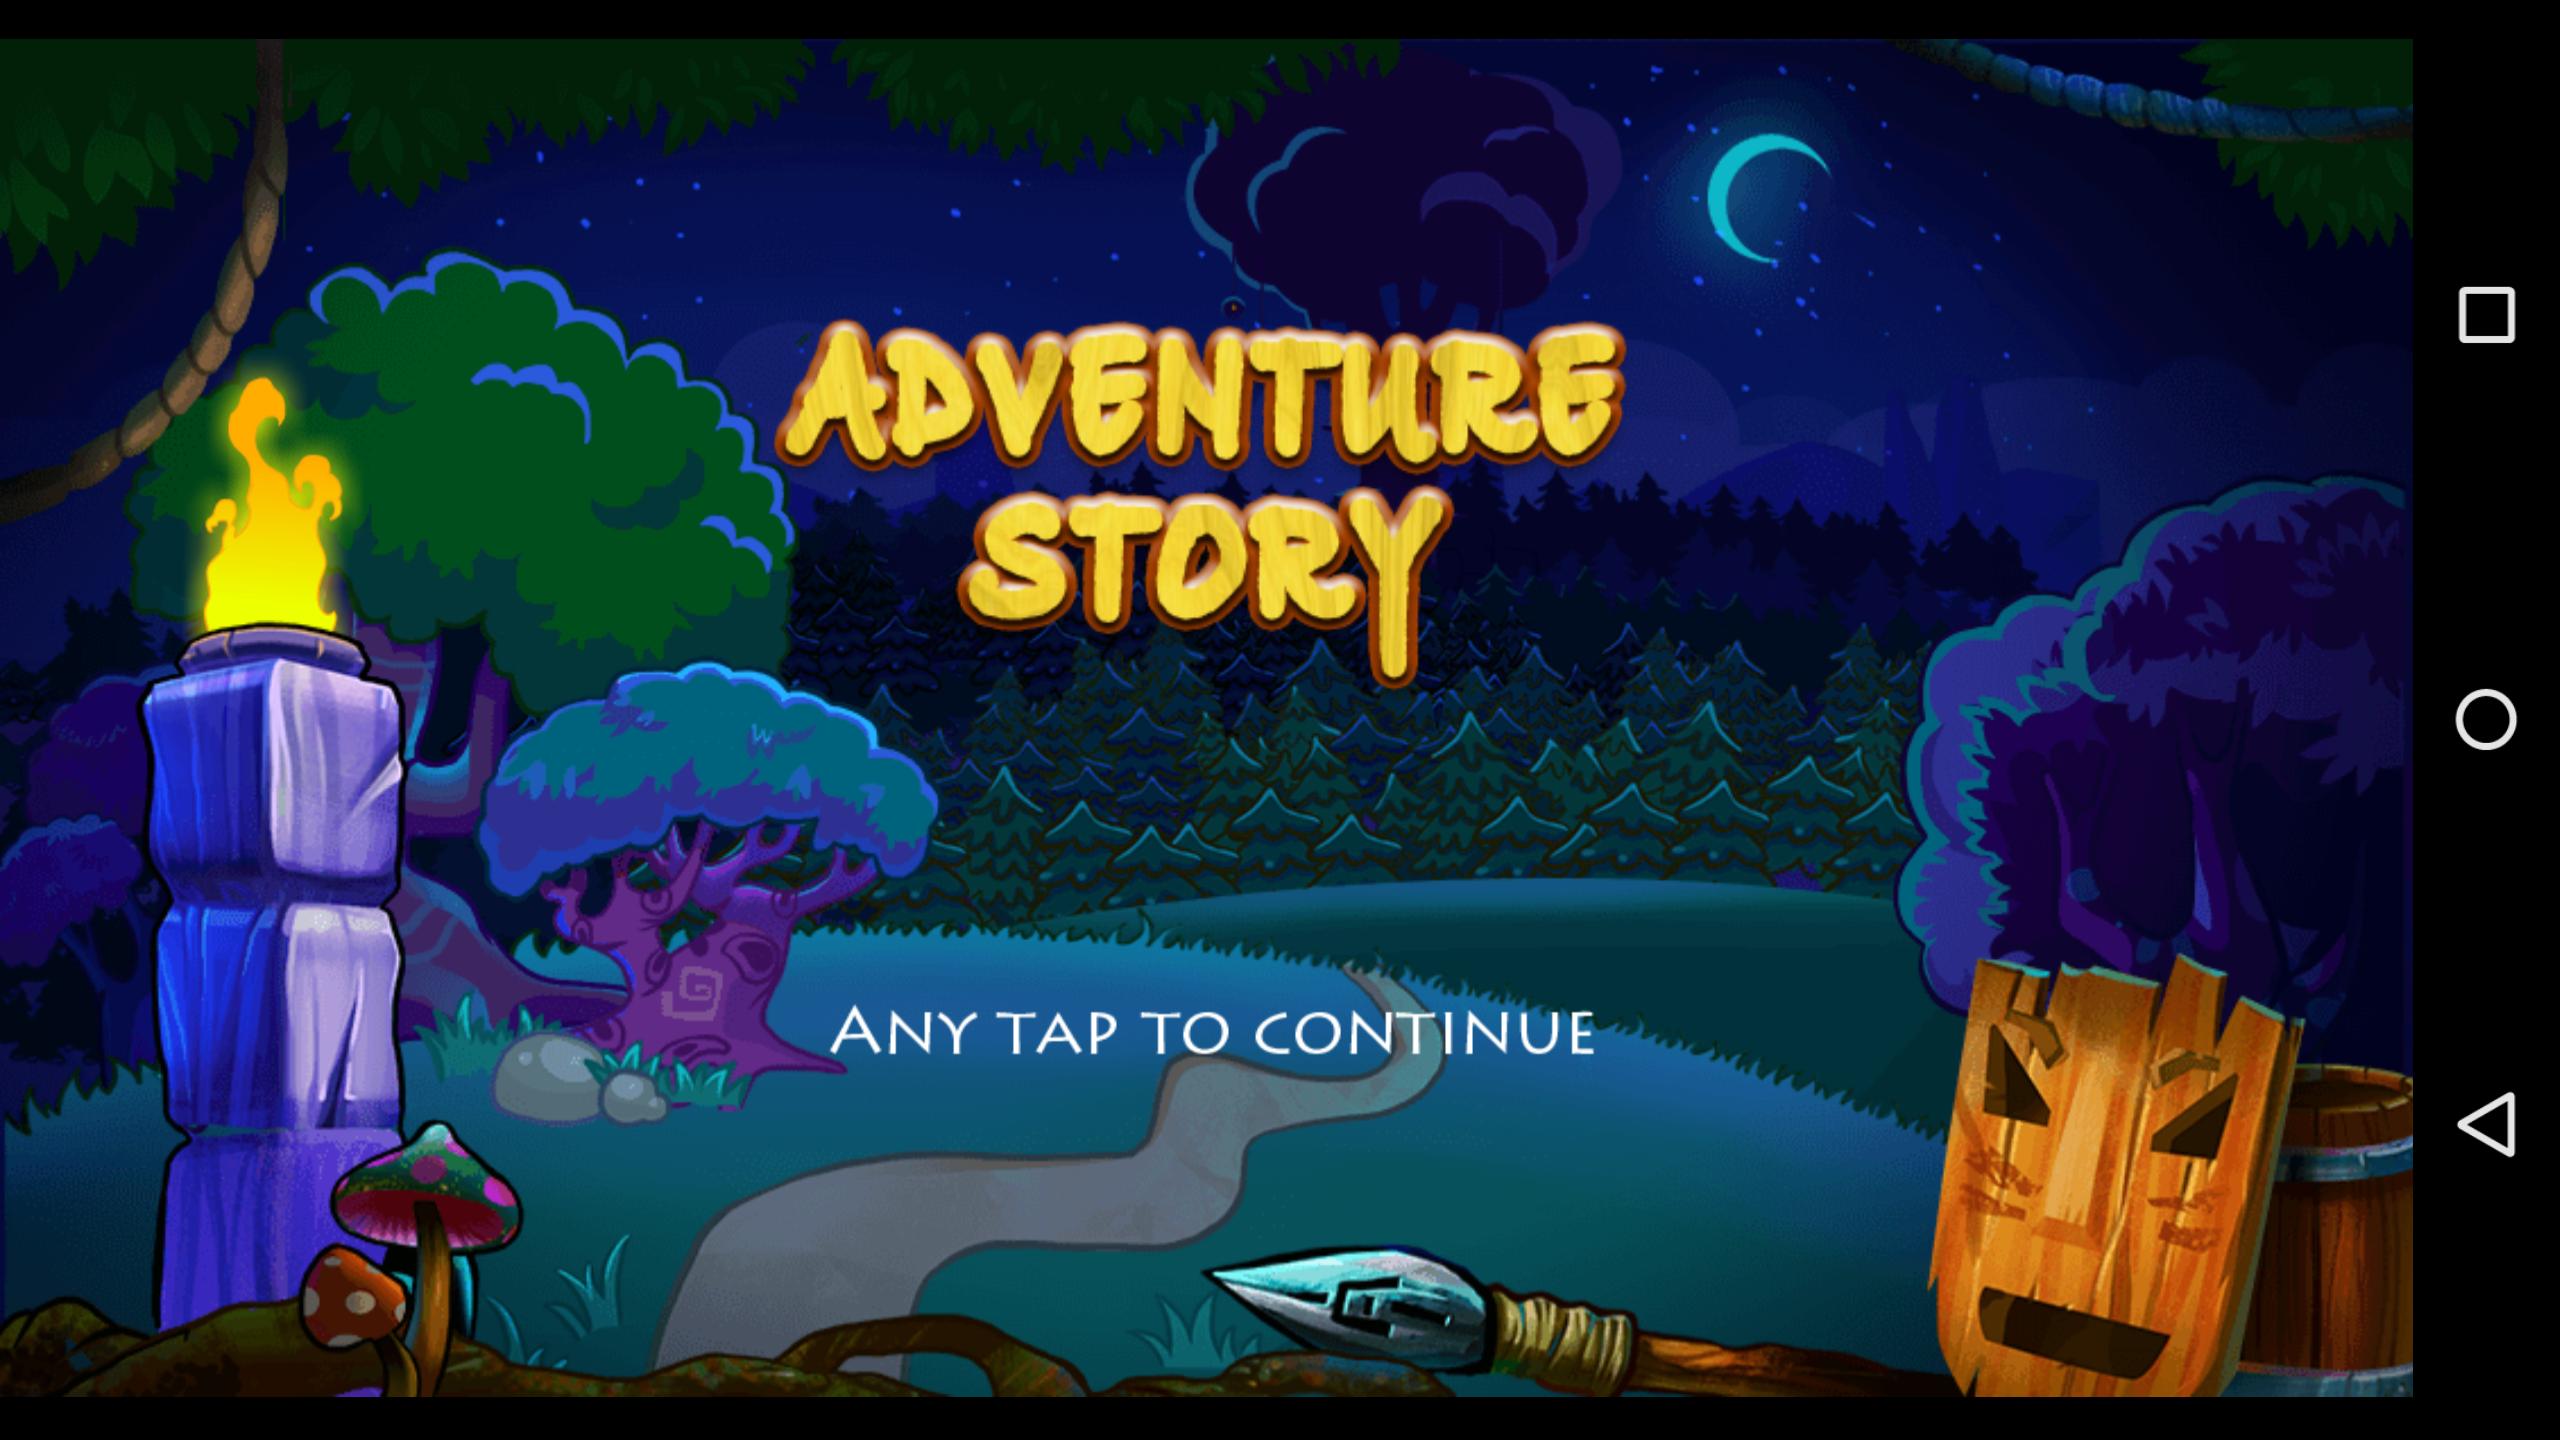 Your story adventure. Adventure story игра. Adventure story 1. EBF Adventure story. Adventure story for Kids.